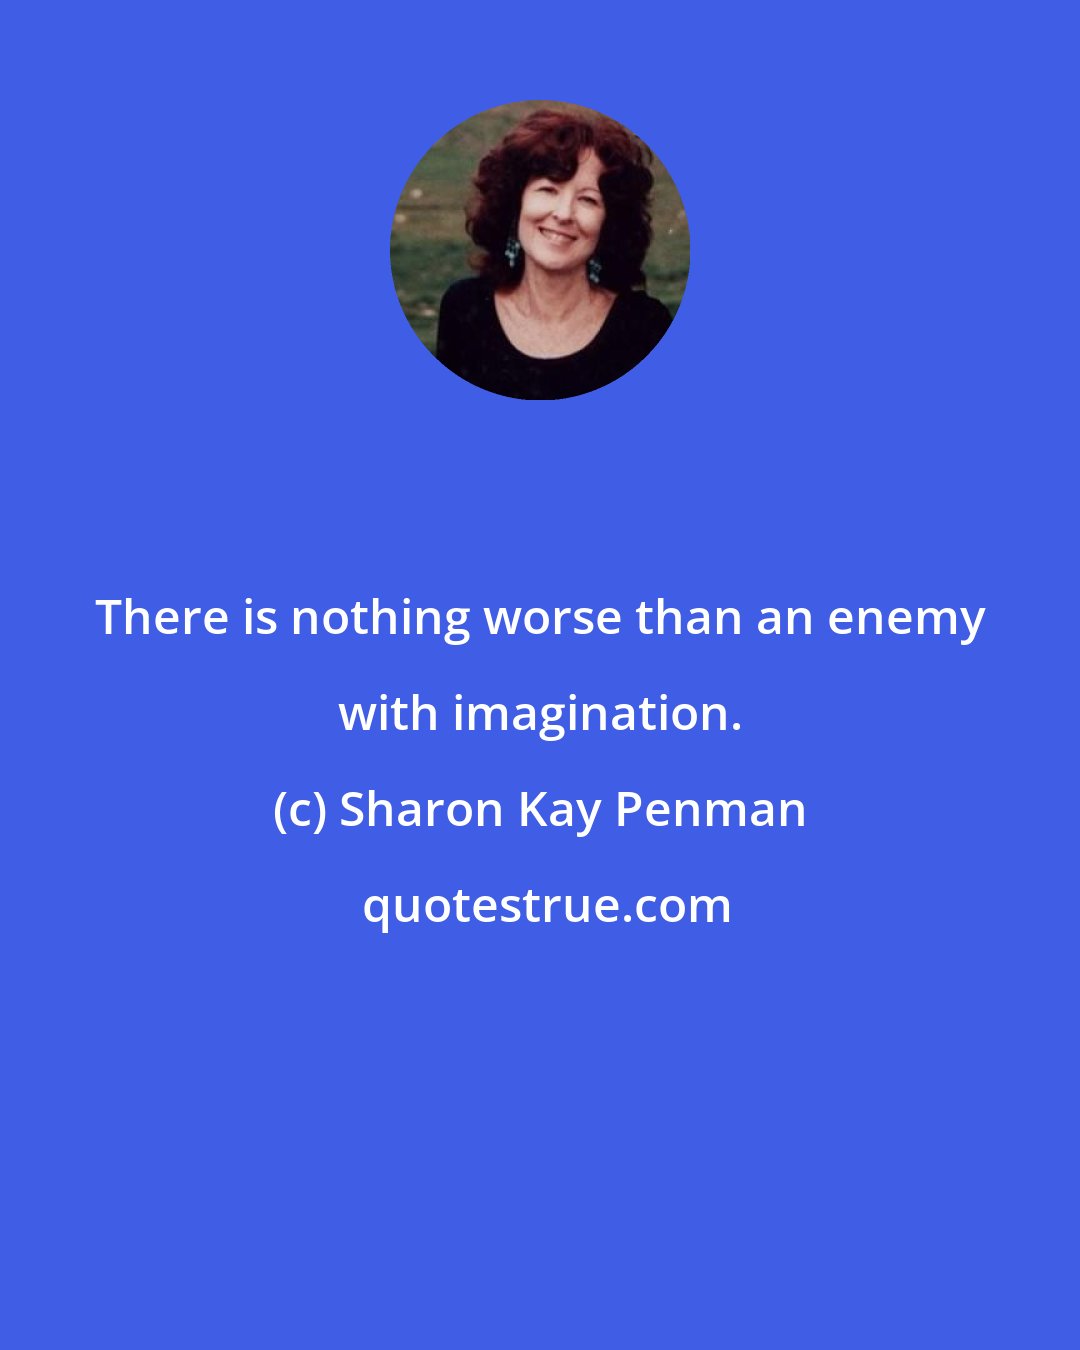 Sharon Kay Penman: There is nothing worse than an enemy with imagination.